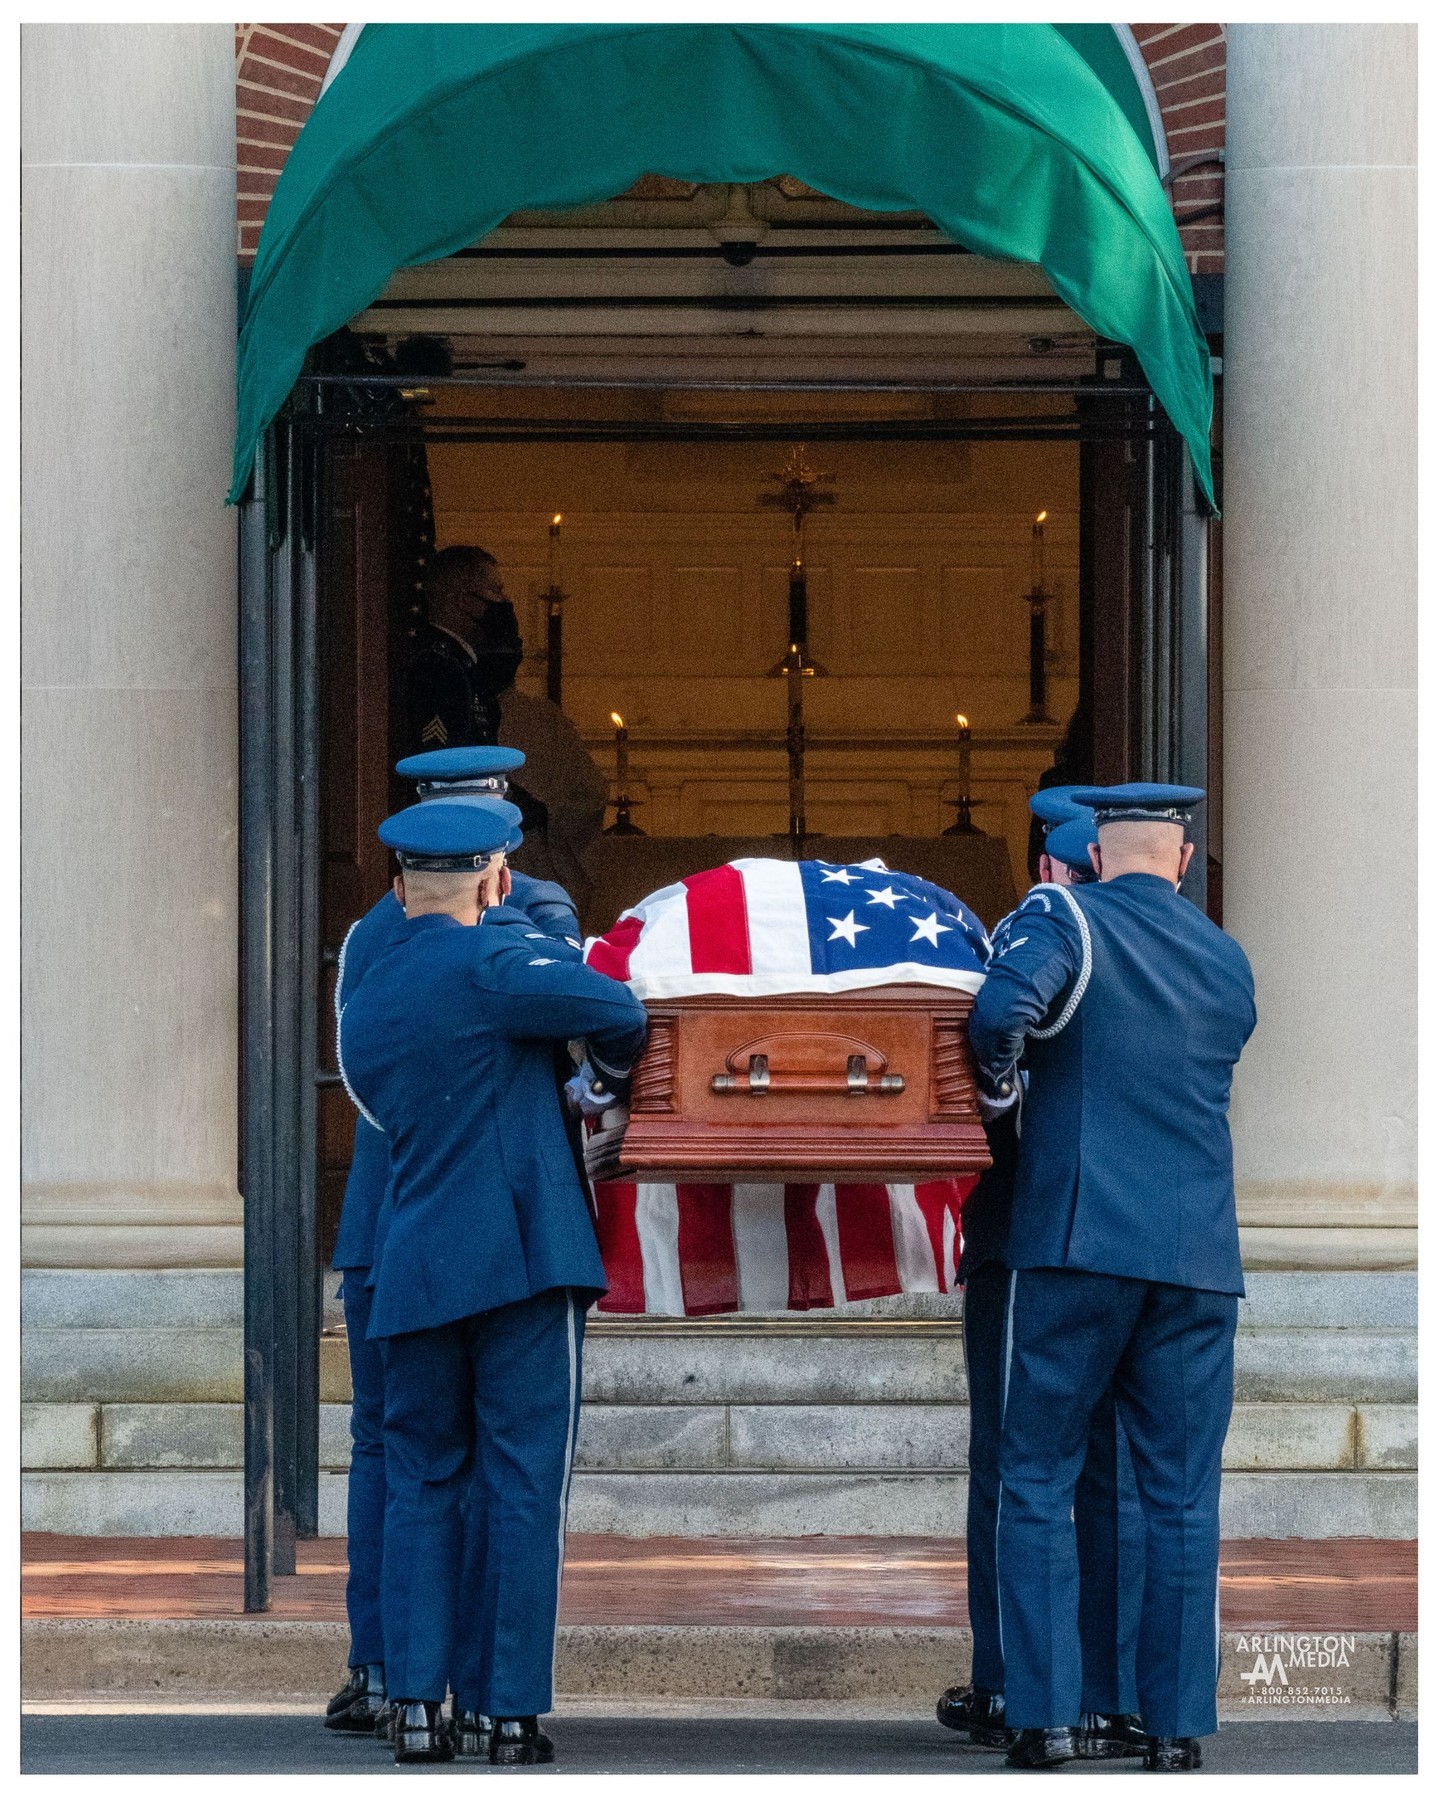 US Air Force airmen carry the remains of an honored veteran into the Old Post Chapel before a service at Arlington National Cemetery in Arlington, Virginia.